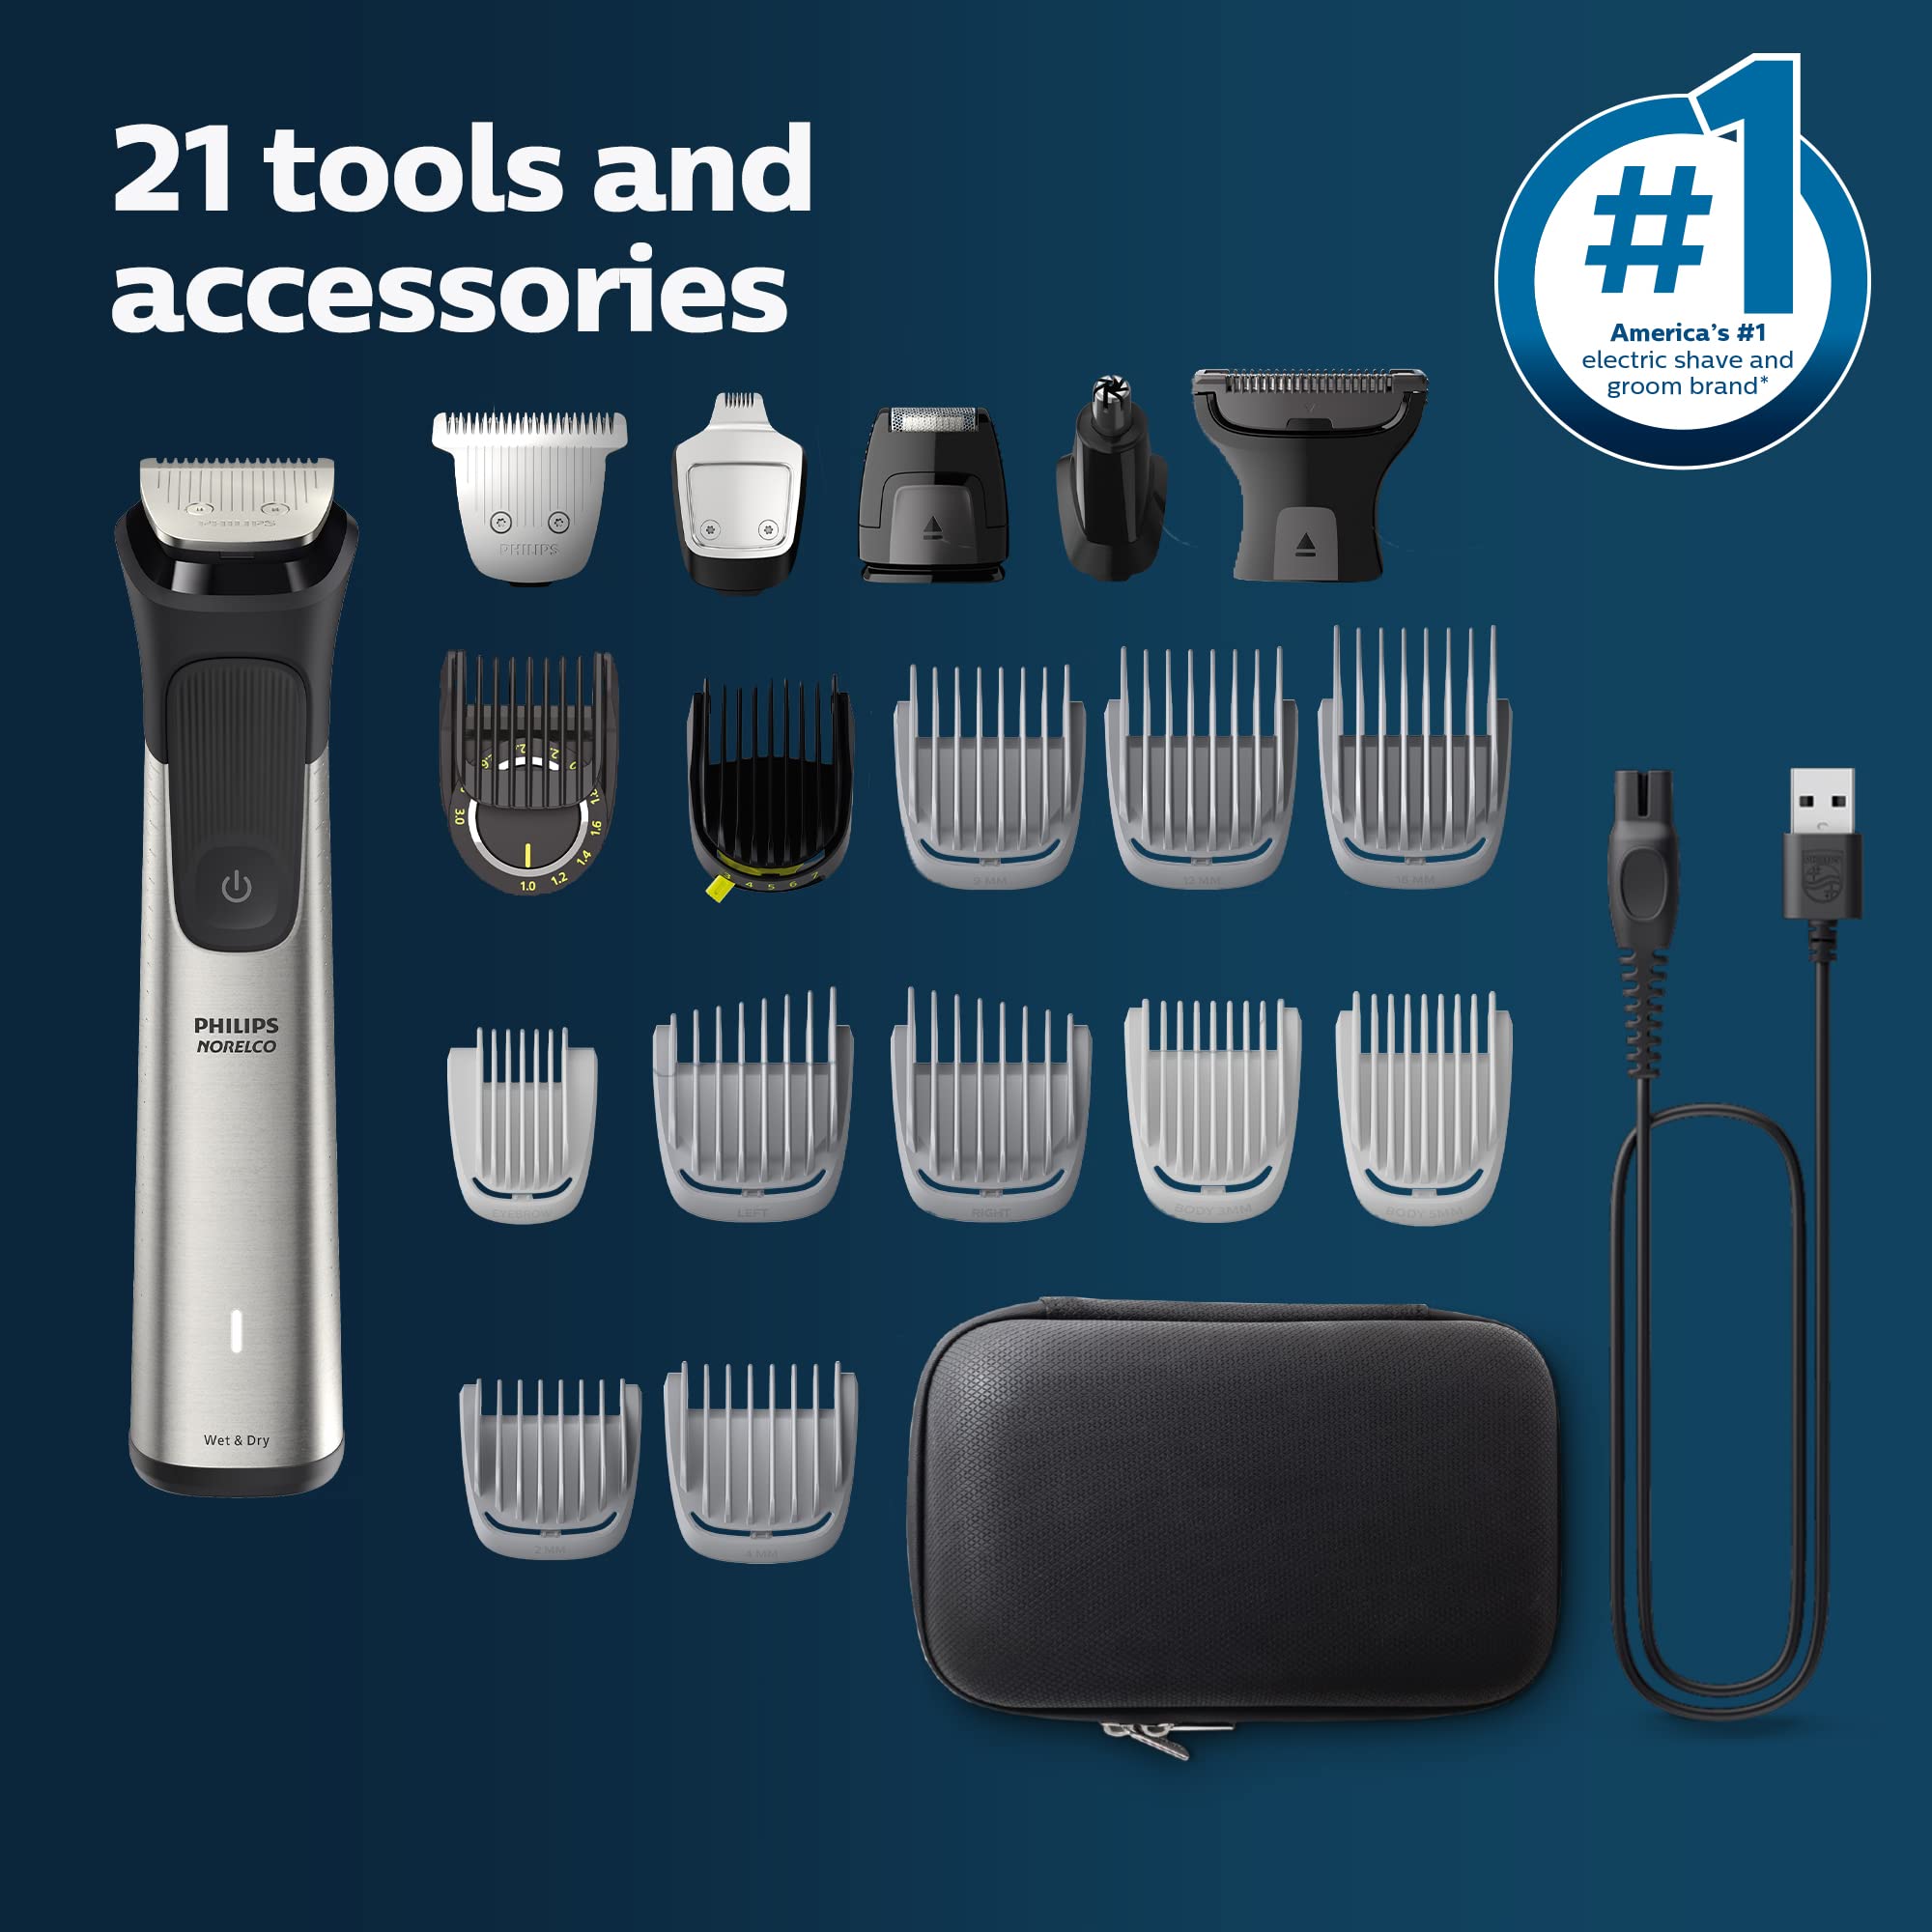 NEW Philips Norelco Multigroom Series 9000 - 21 piece Men's Grooming Kit for beard, body, face, nose, ear hair trimmer w/ premium storage case, MG9510/60